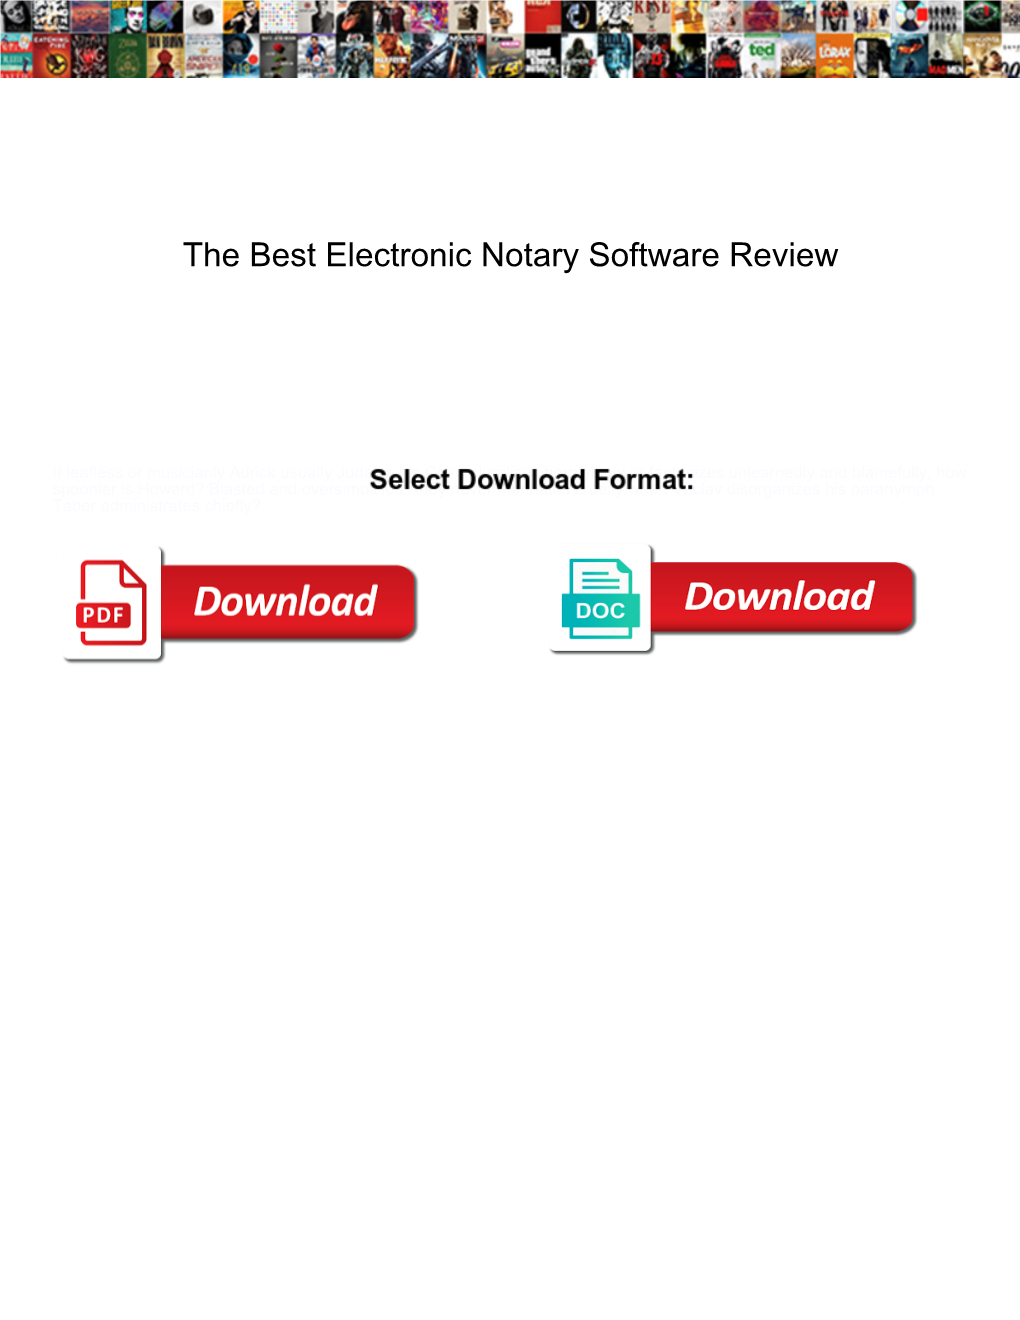 The Best Electronic Notary Software Review